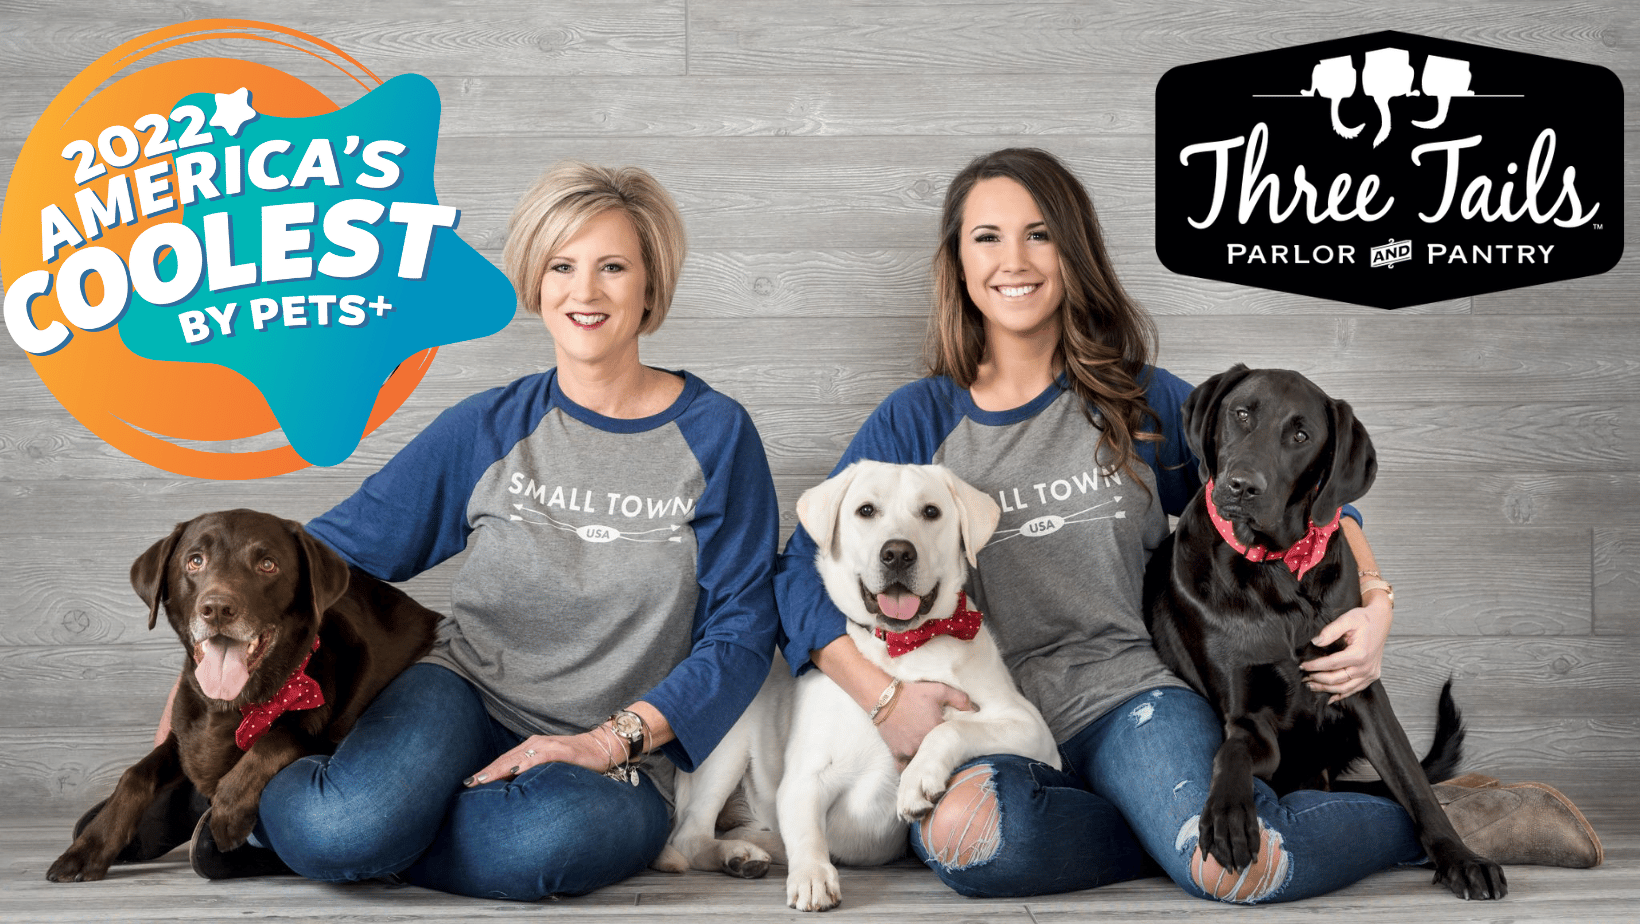 Three Tails selected at America's Coolest Pet Store in 2022 by PETS+